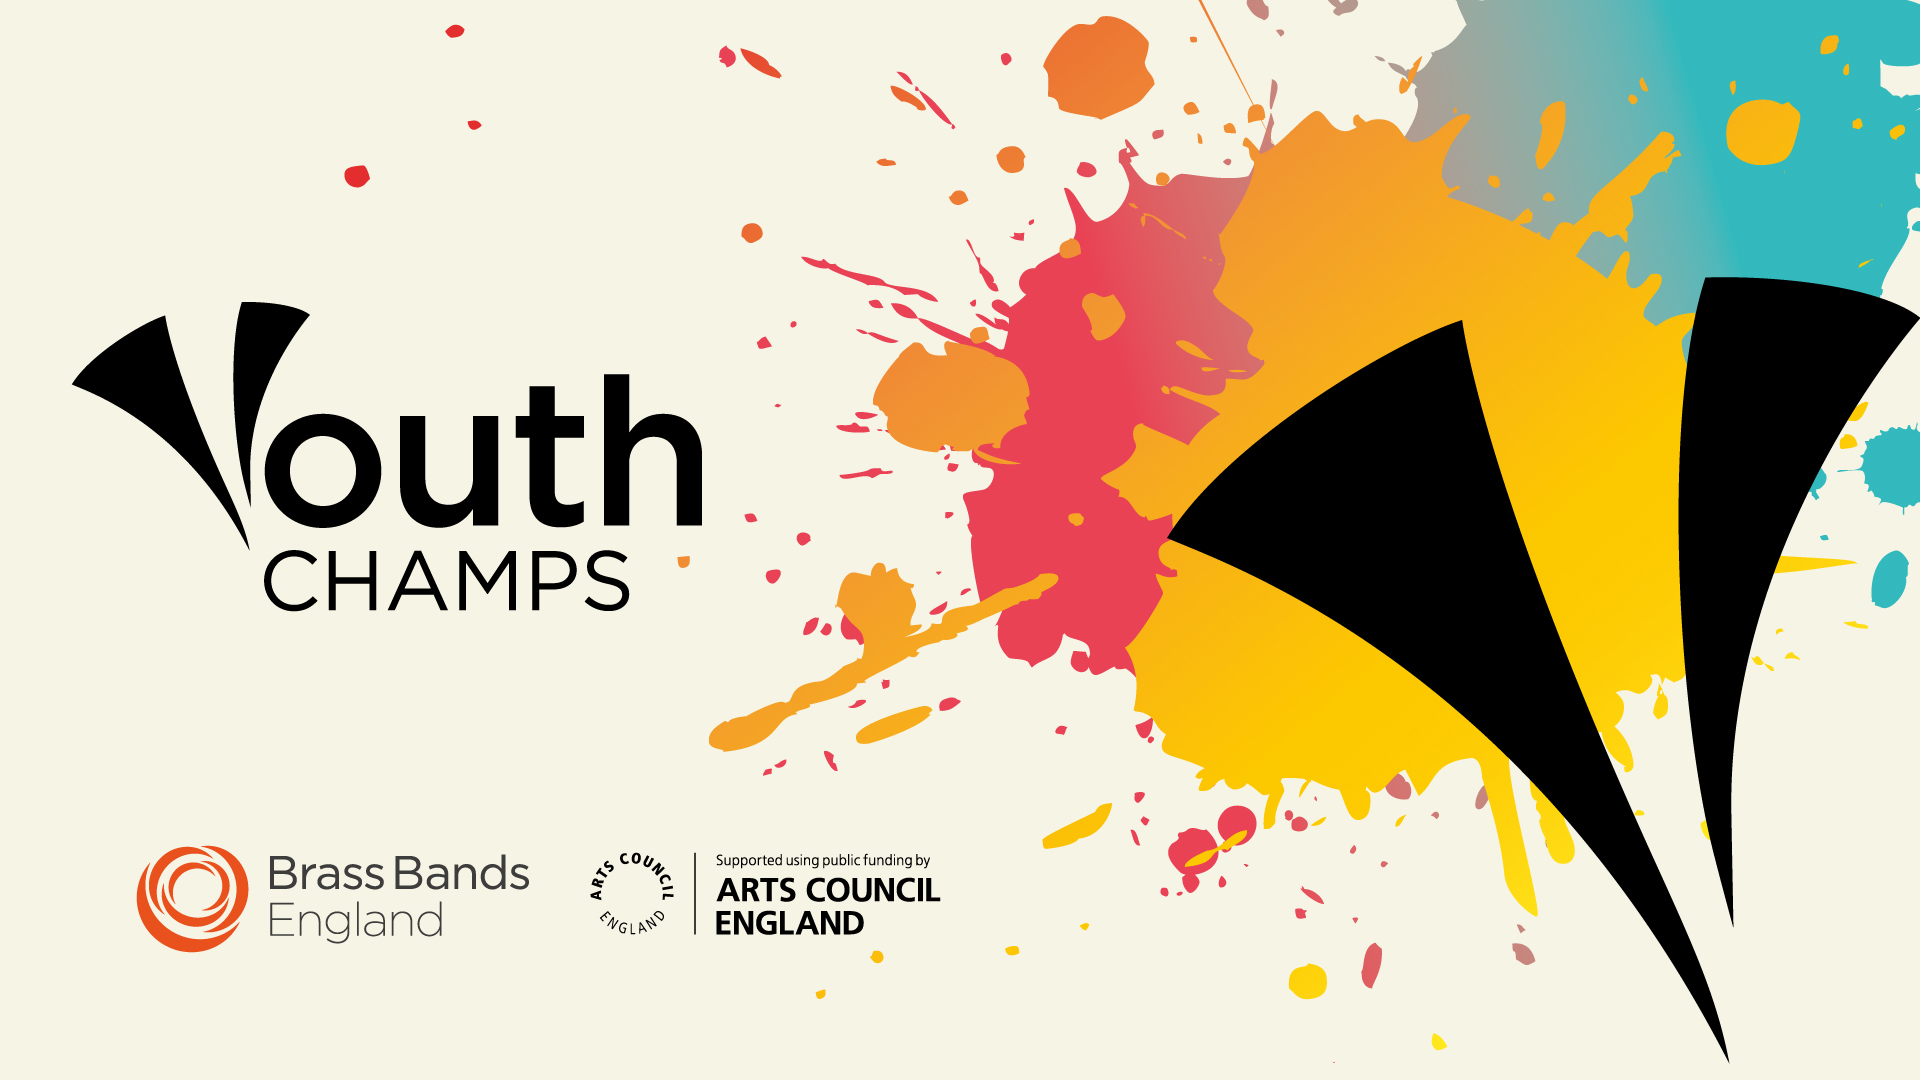 Youth champs text where the Y is shaped like two horns, appears next to a group of different brightly coloured paint splatters